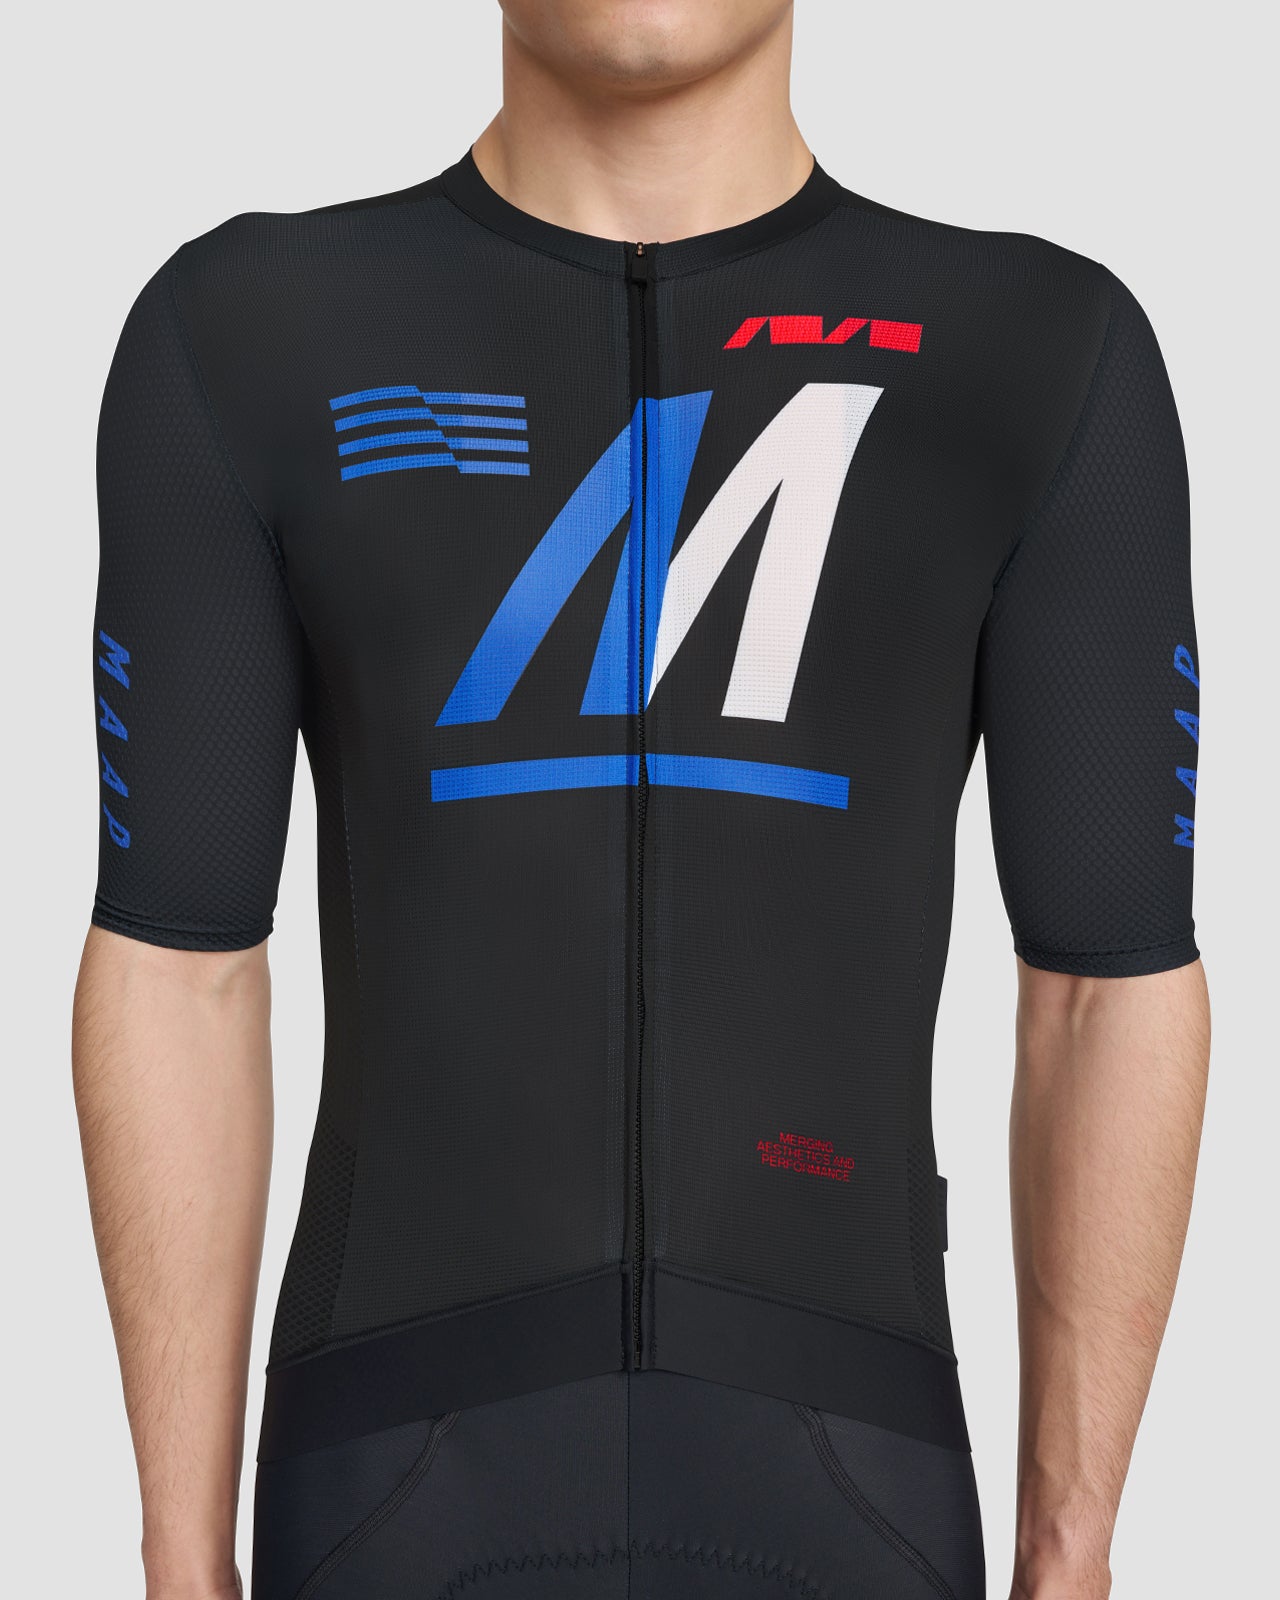 Rival Pro Air Jersey